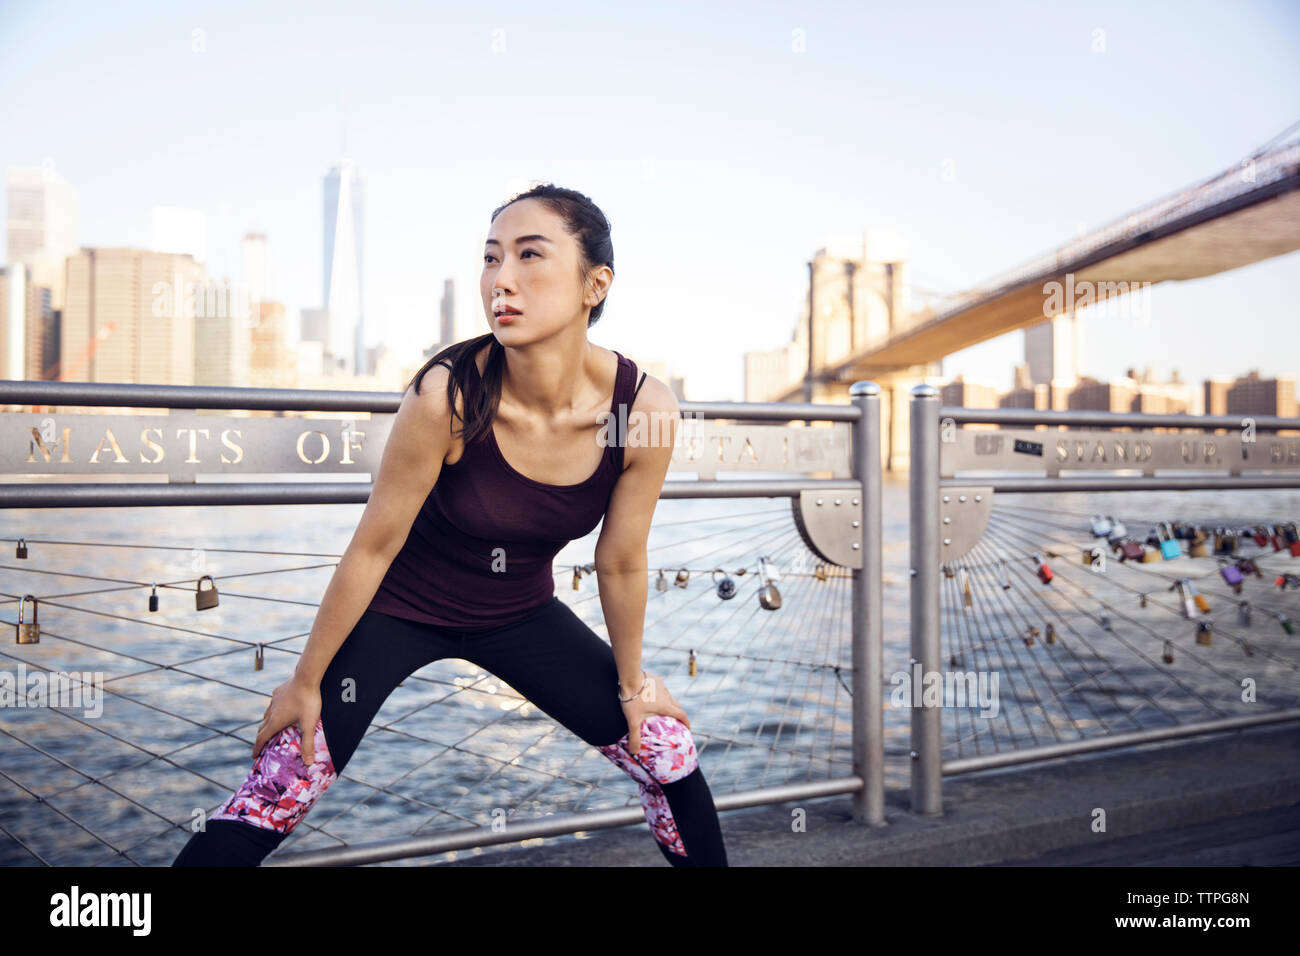 Thoughtful female athlete exercising on promenade with Brooklyn Bridge and One World Trade Center in background Stock Photo